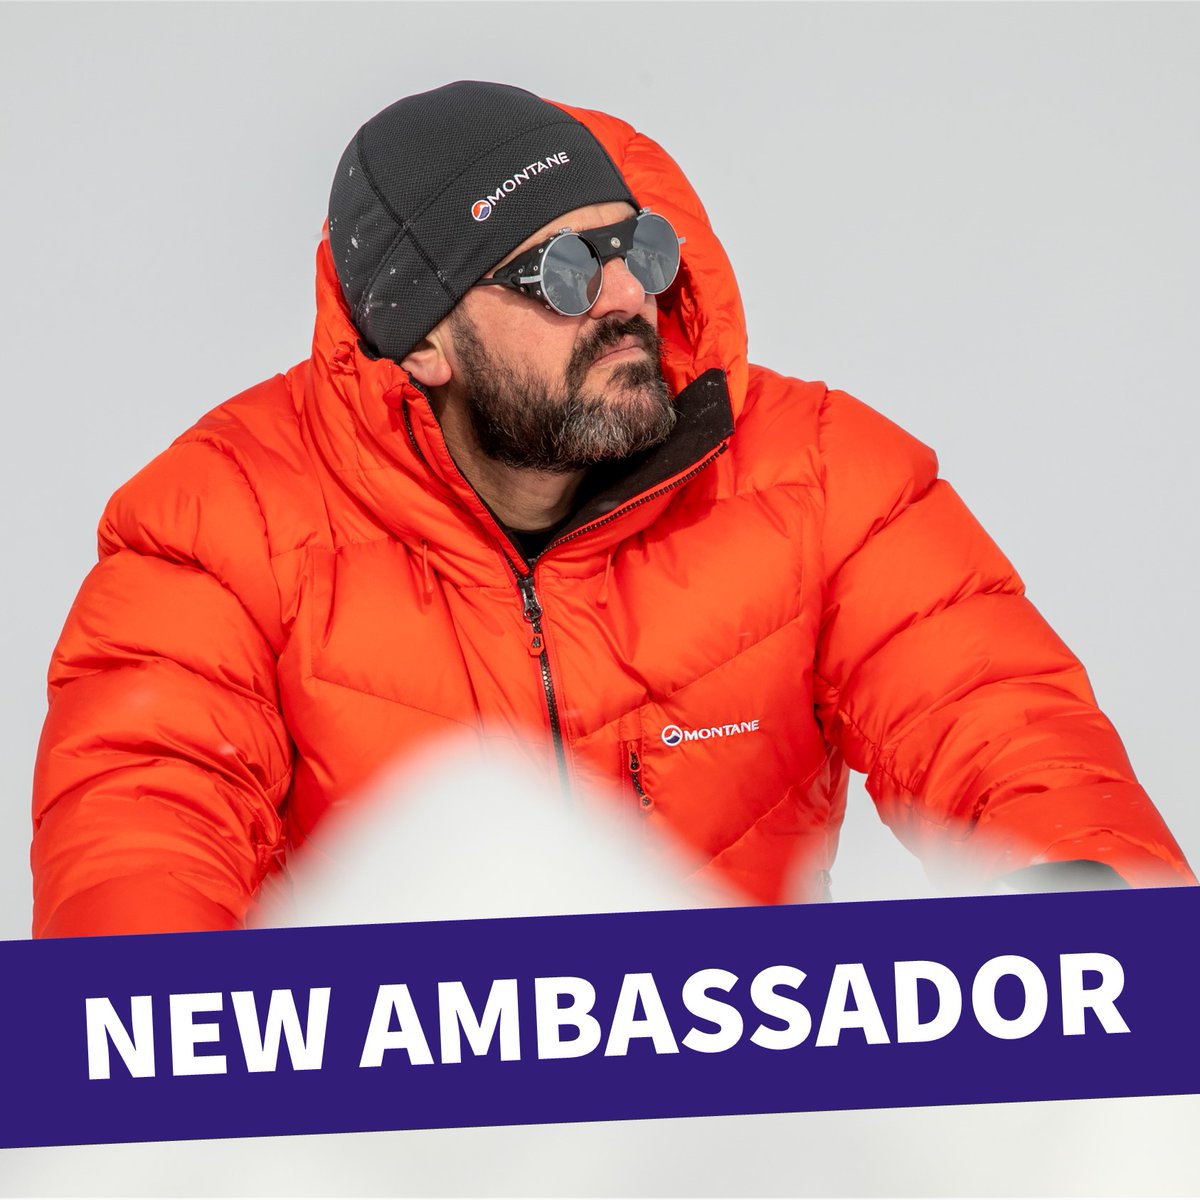 We are delighted to welcome award-winning adventurer Jordan Wylie MBE to the @UlyssesTrust as one of our Ambassadors. We are super happy to have Jordan on board. #thankyou Jordan